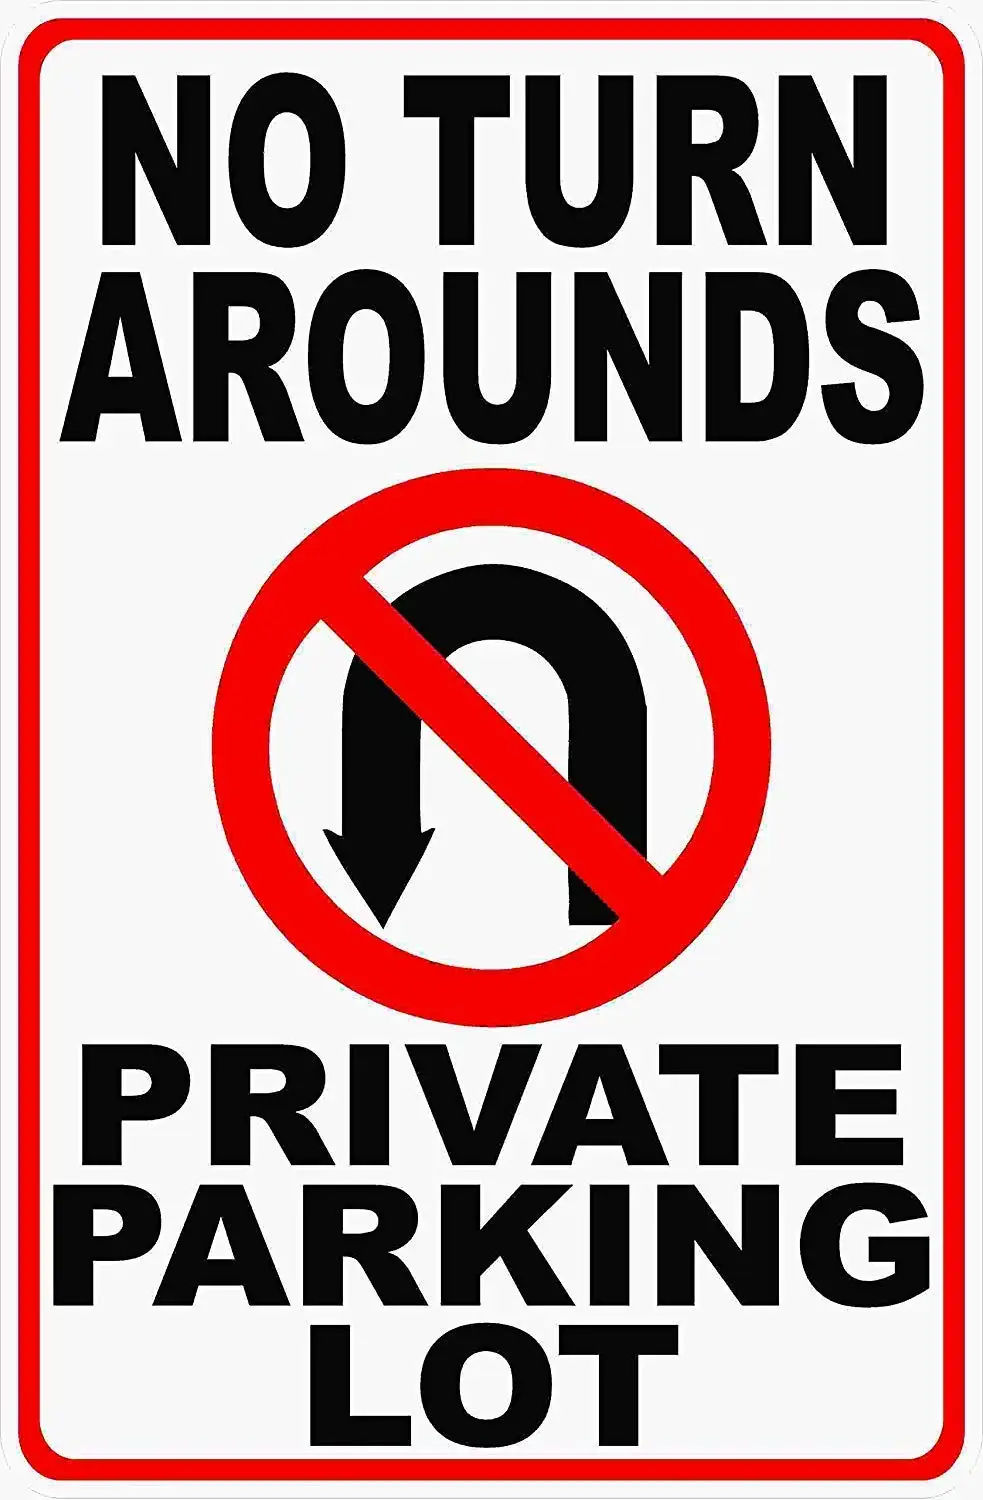 

New Tin Sign No Turn Arounds Private Parking Lot Prevent Vehicles from Turning Around or Making U-Turns. Aluminum Metal Road